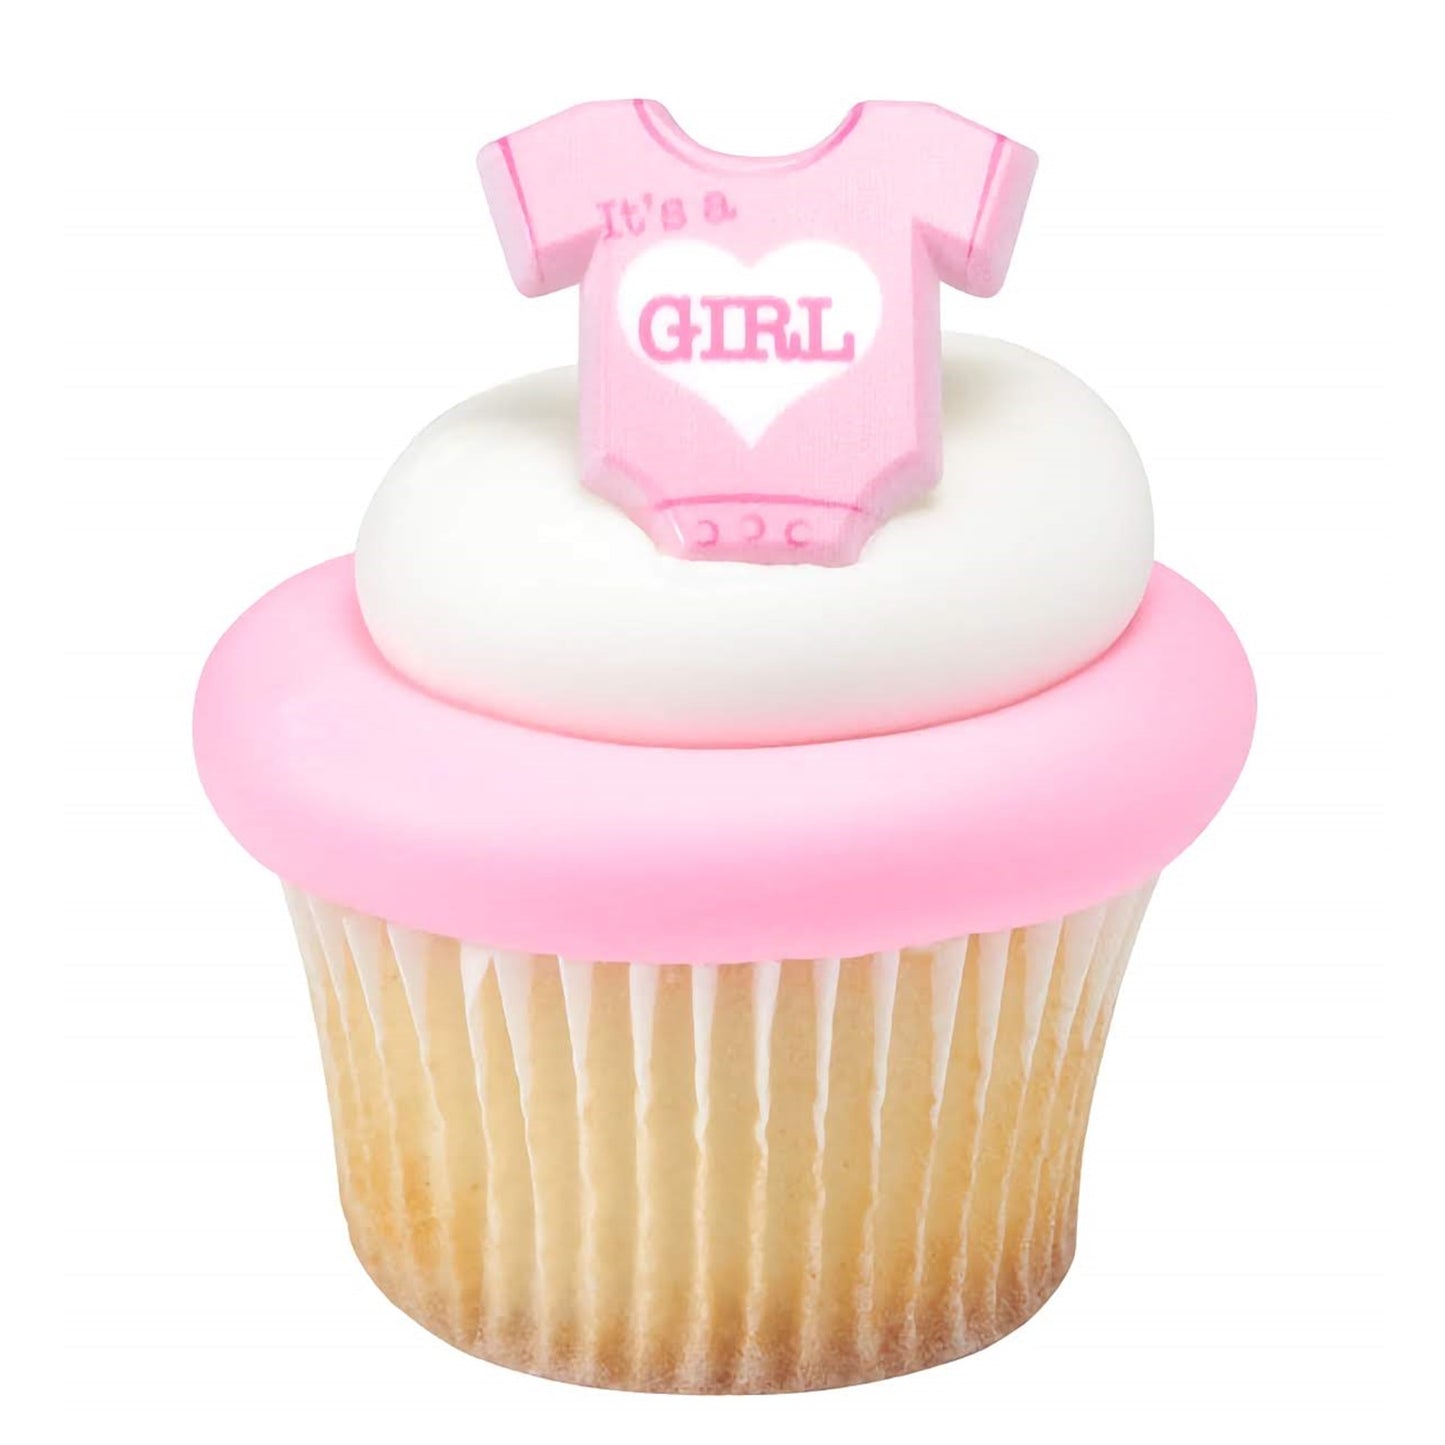 Pink 'It's a Girl!' cupcake pick with baby bottle detail, a delightful choice for baby shower desserts and gender reveal events.